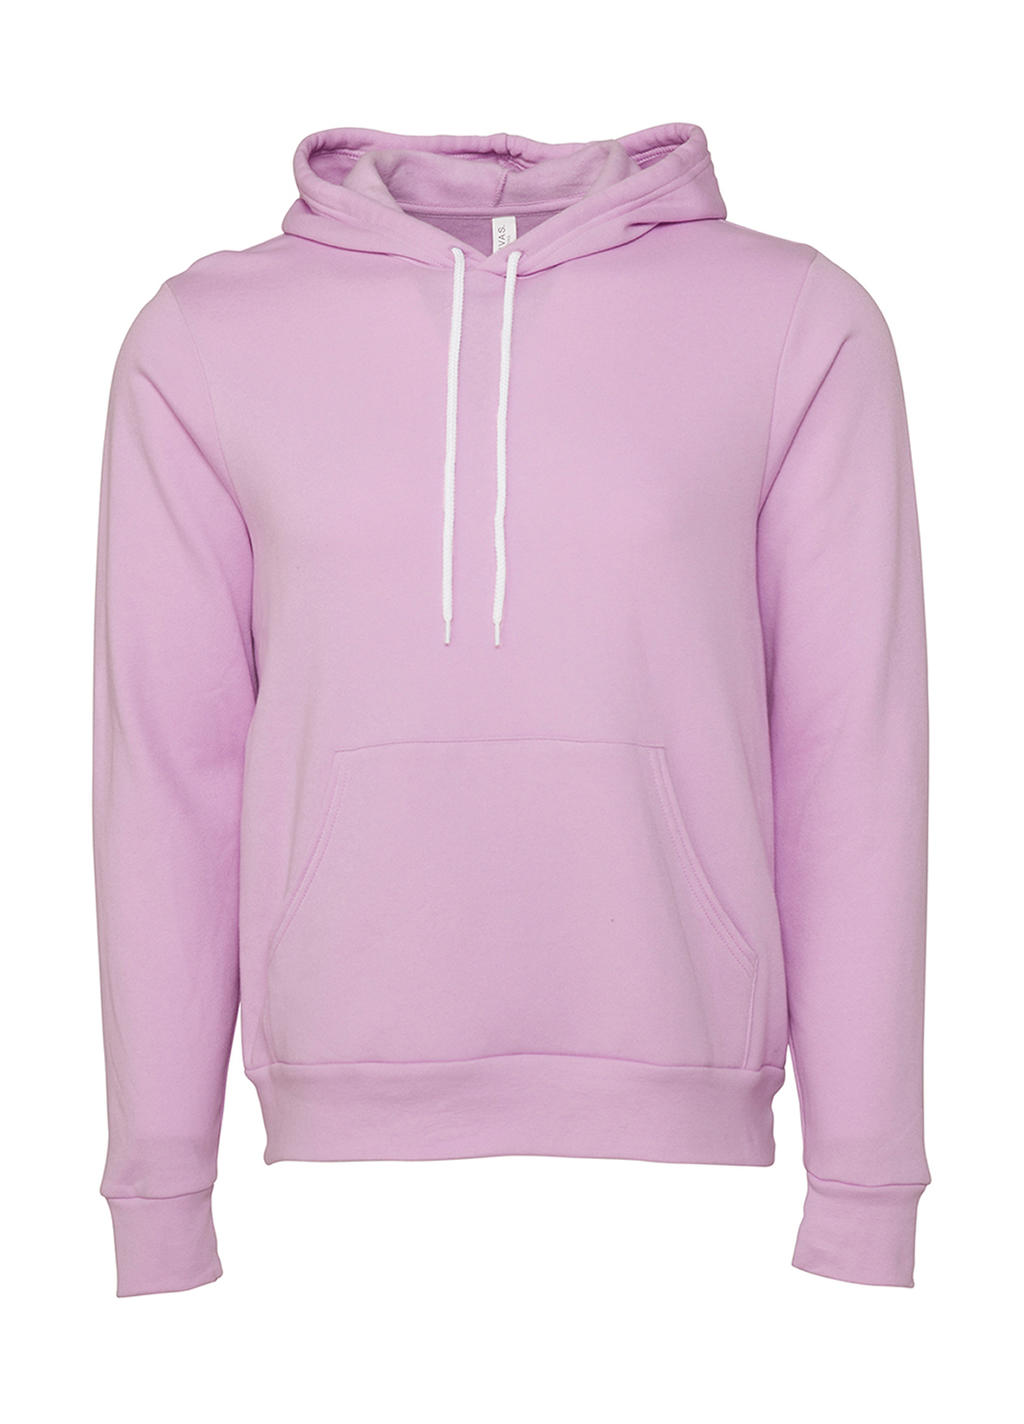  Unisex Poly-Cotton Pullover Hoodie in Farbe Lilac